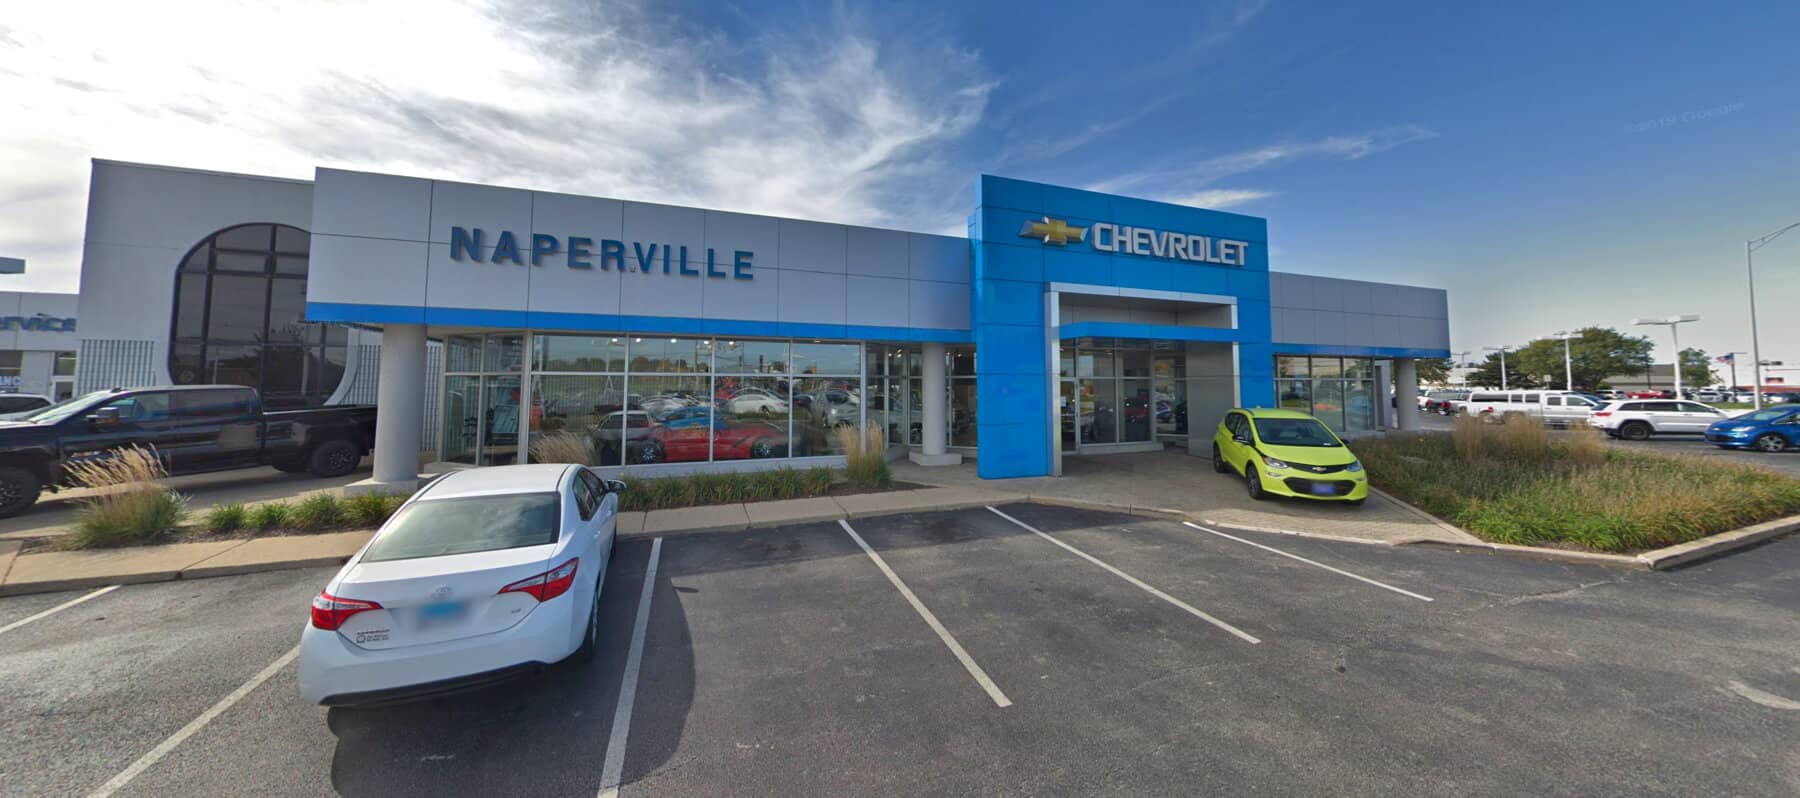 An exterior shot of a Chevrolet dealership during the day